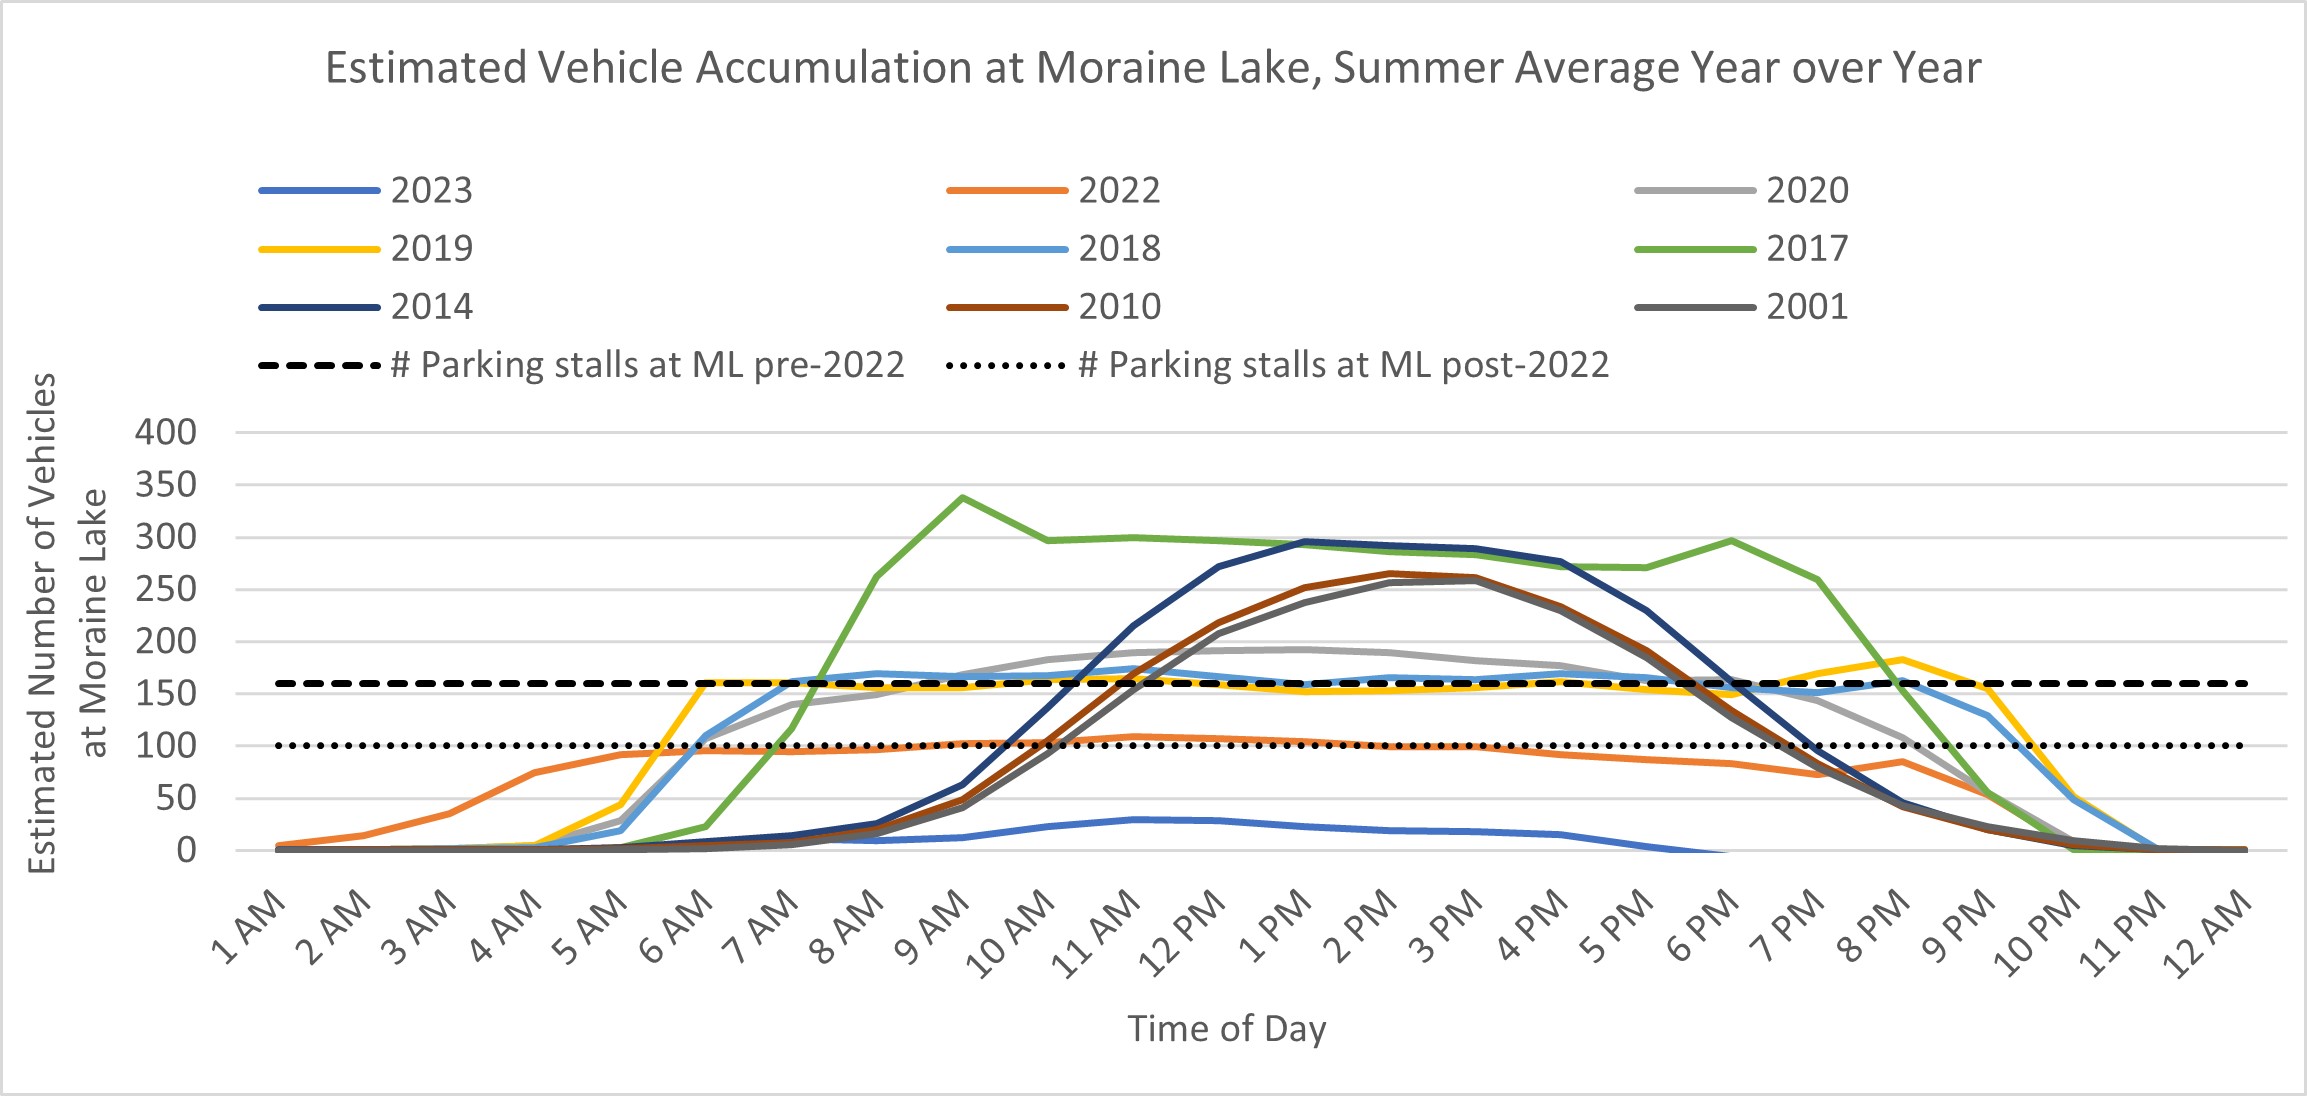 Graphic of Estimated Vehicle Accumulation at Moraine Lake, Summer Average Year over Year. More details provided in the text version below. 